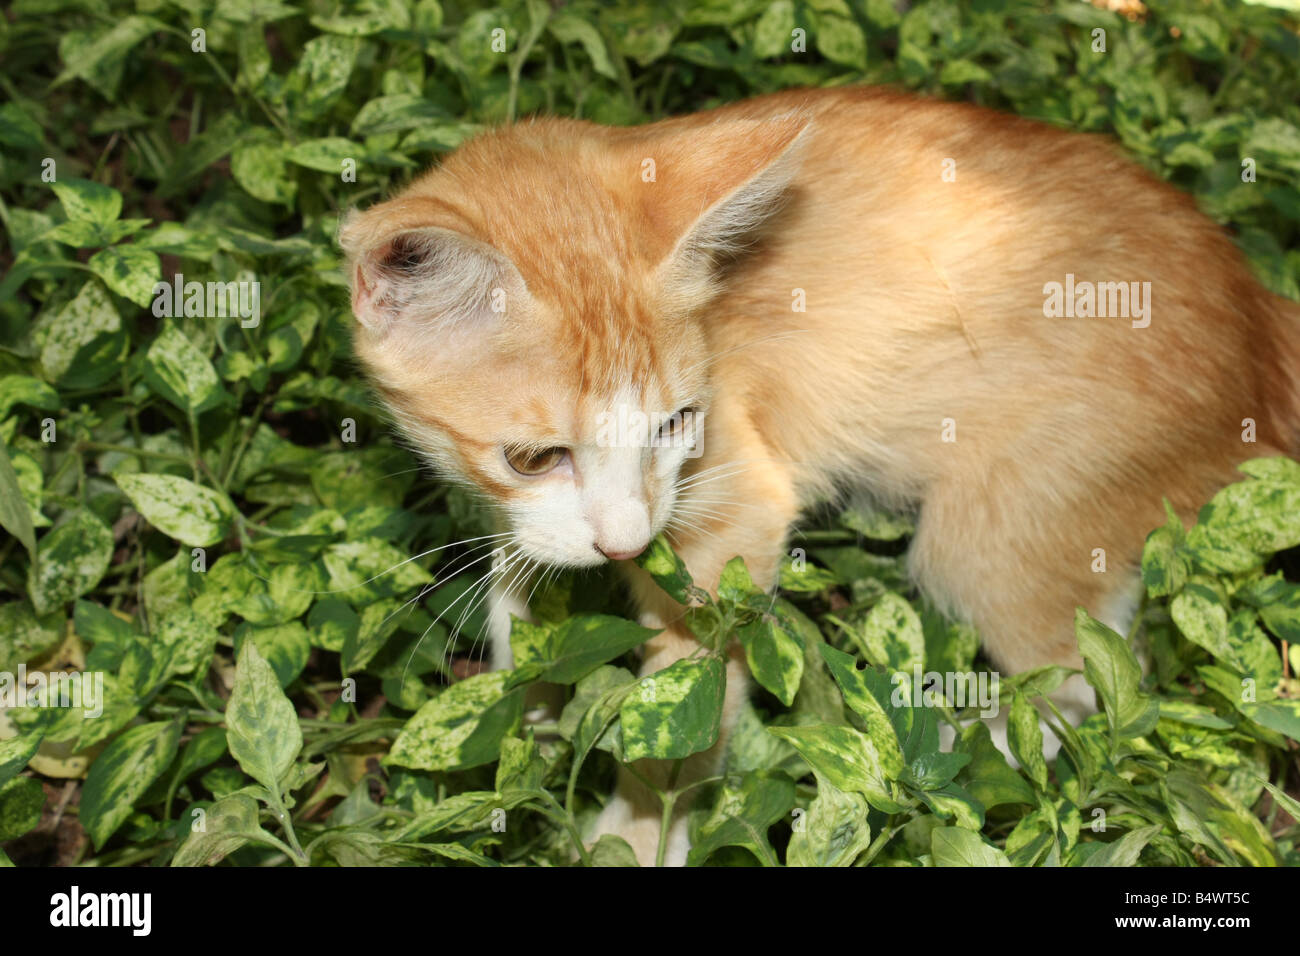 An adorable beautiful brown cat resting on lush green greenery bed of croton plant with colourful leaves looking sideways Stock Photo